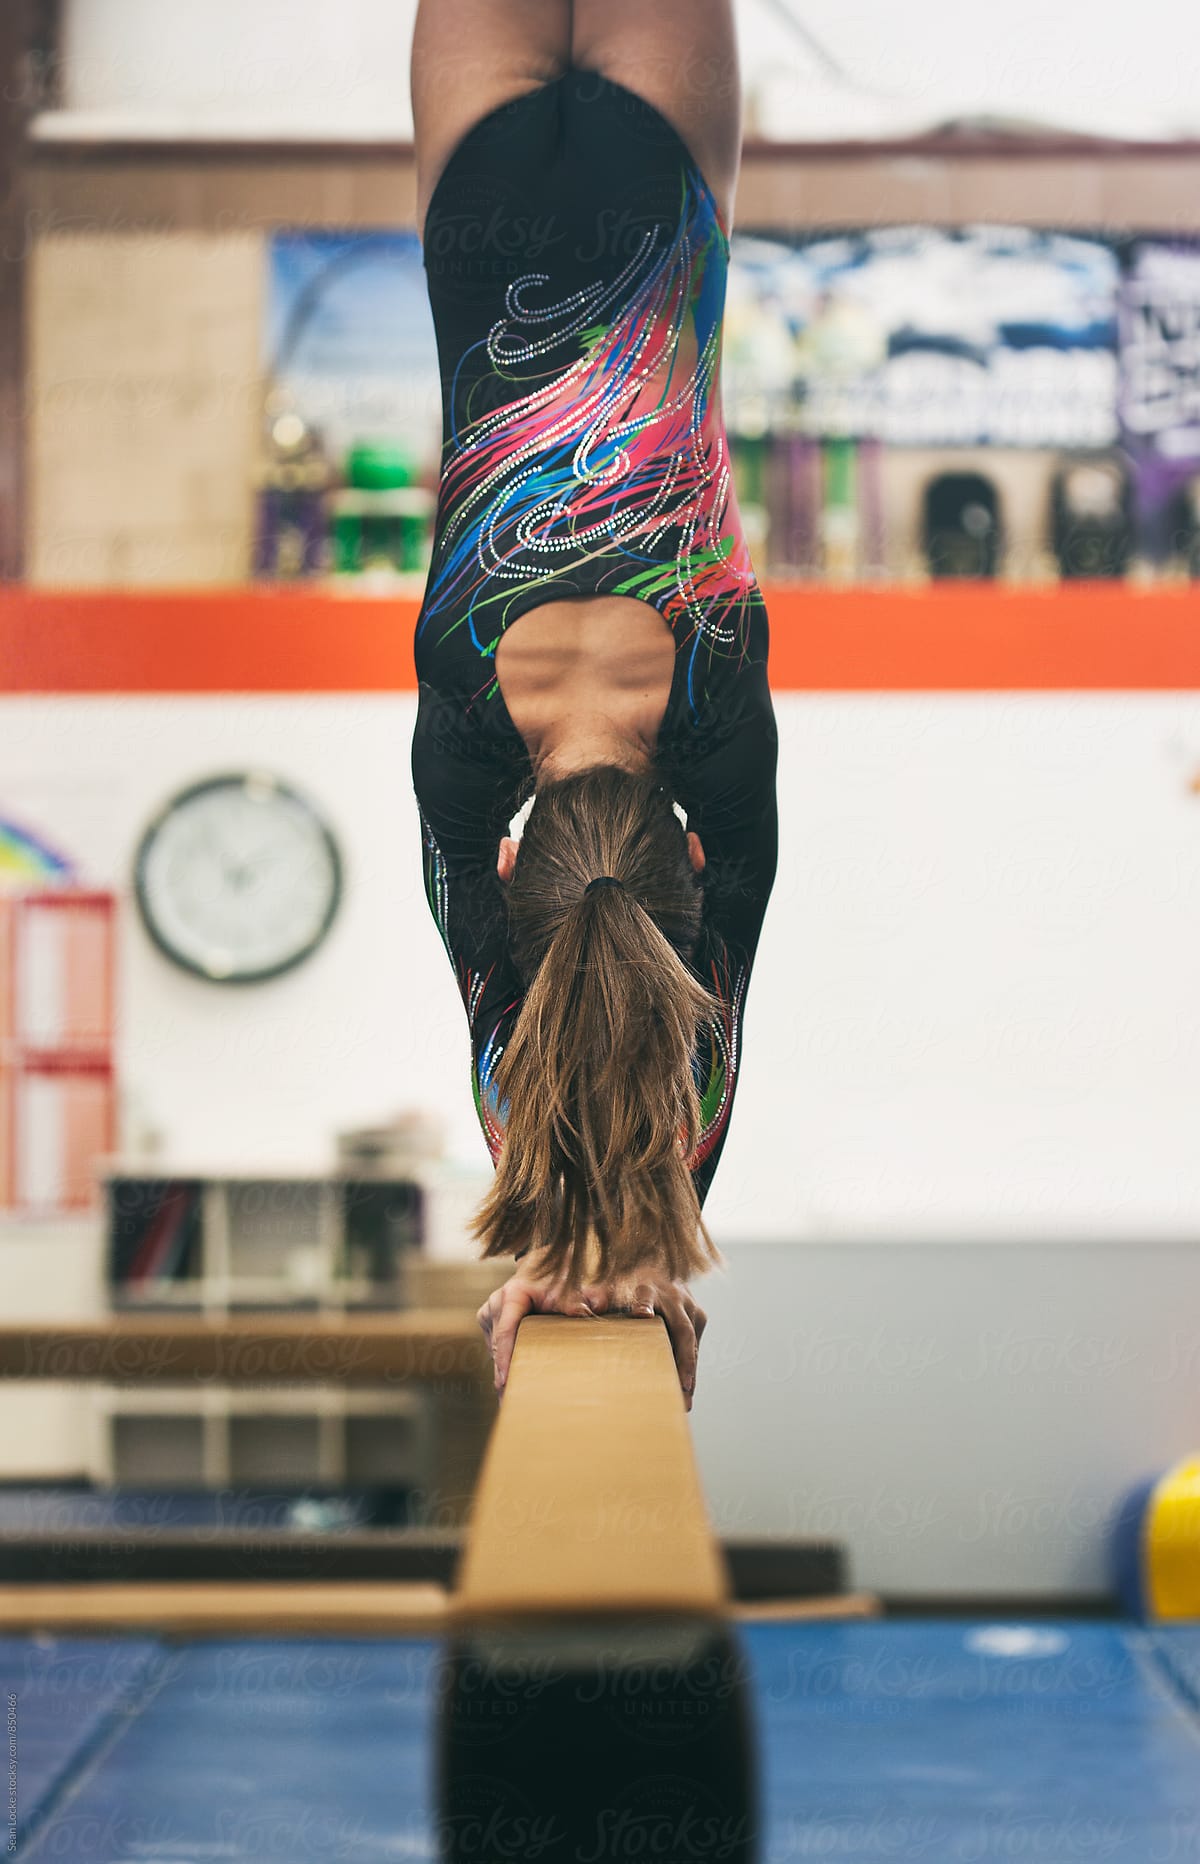 Gymnastics: Girl Does A Handstand On The Balance Beam